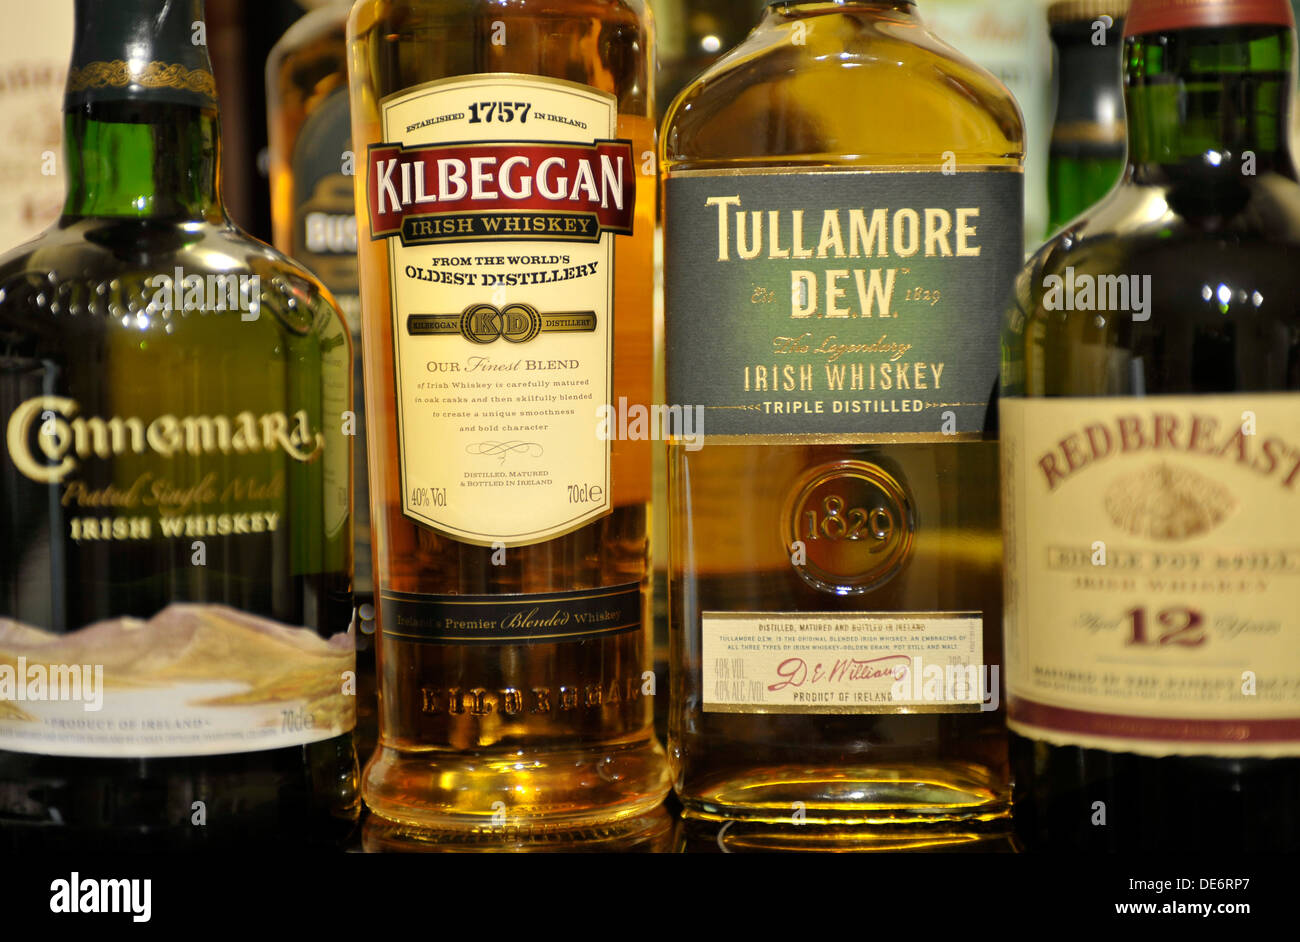 Alamy images stock dew photography and hi-res - Tullamore